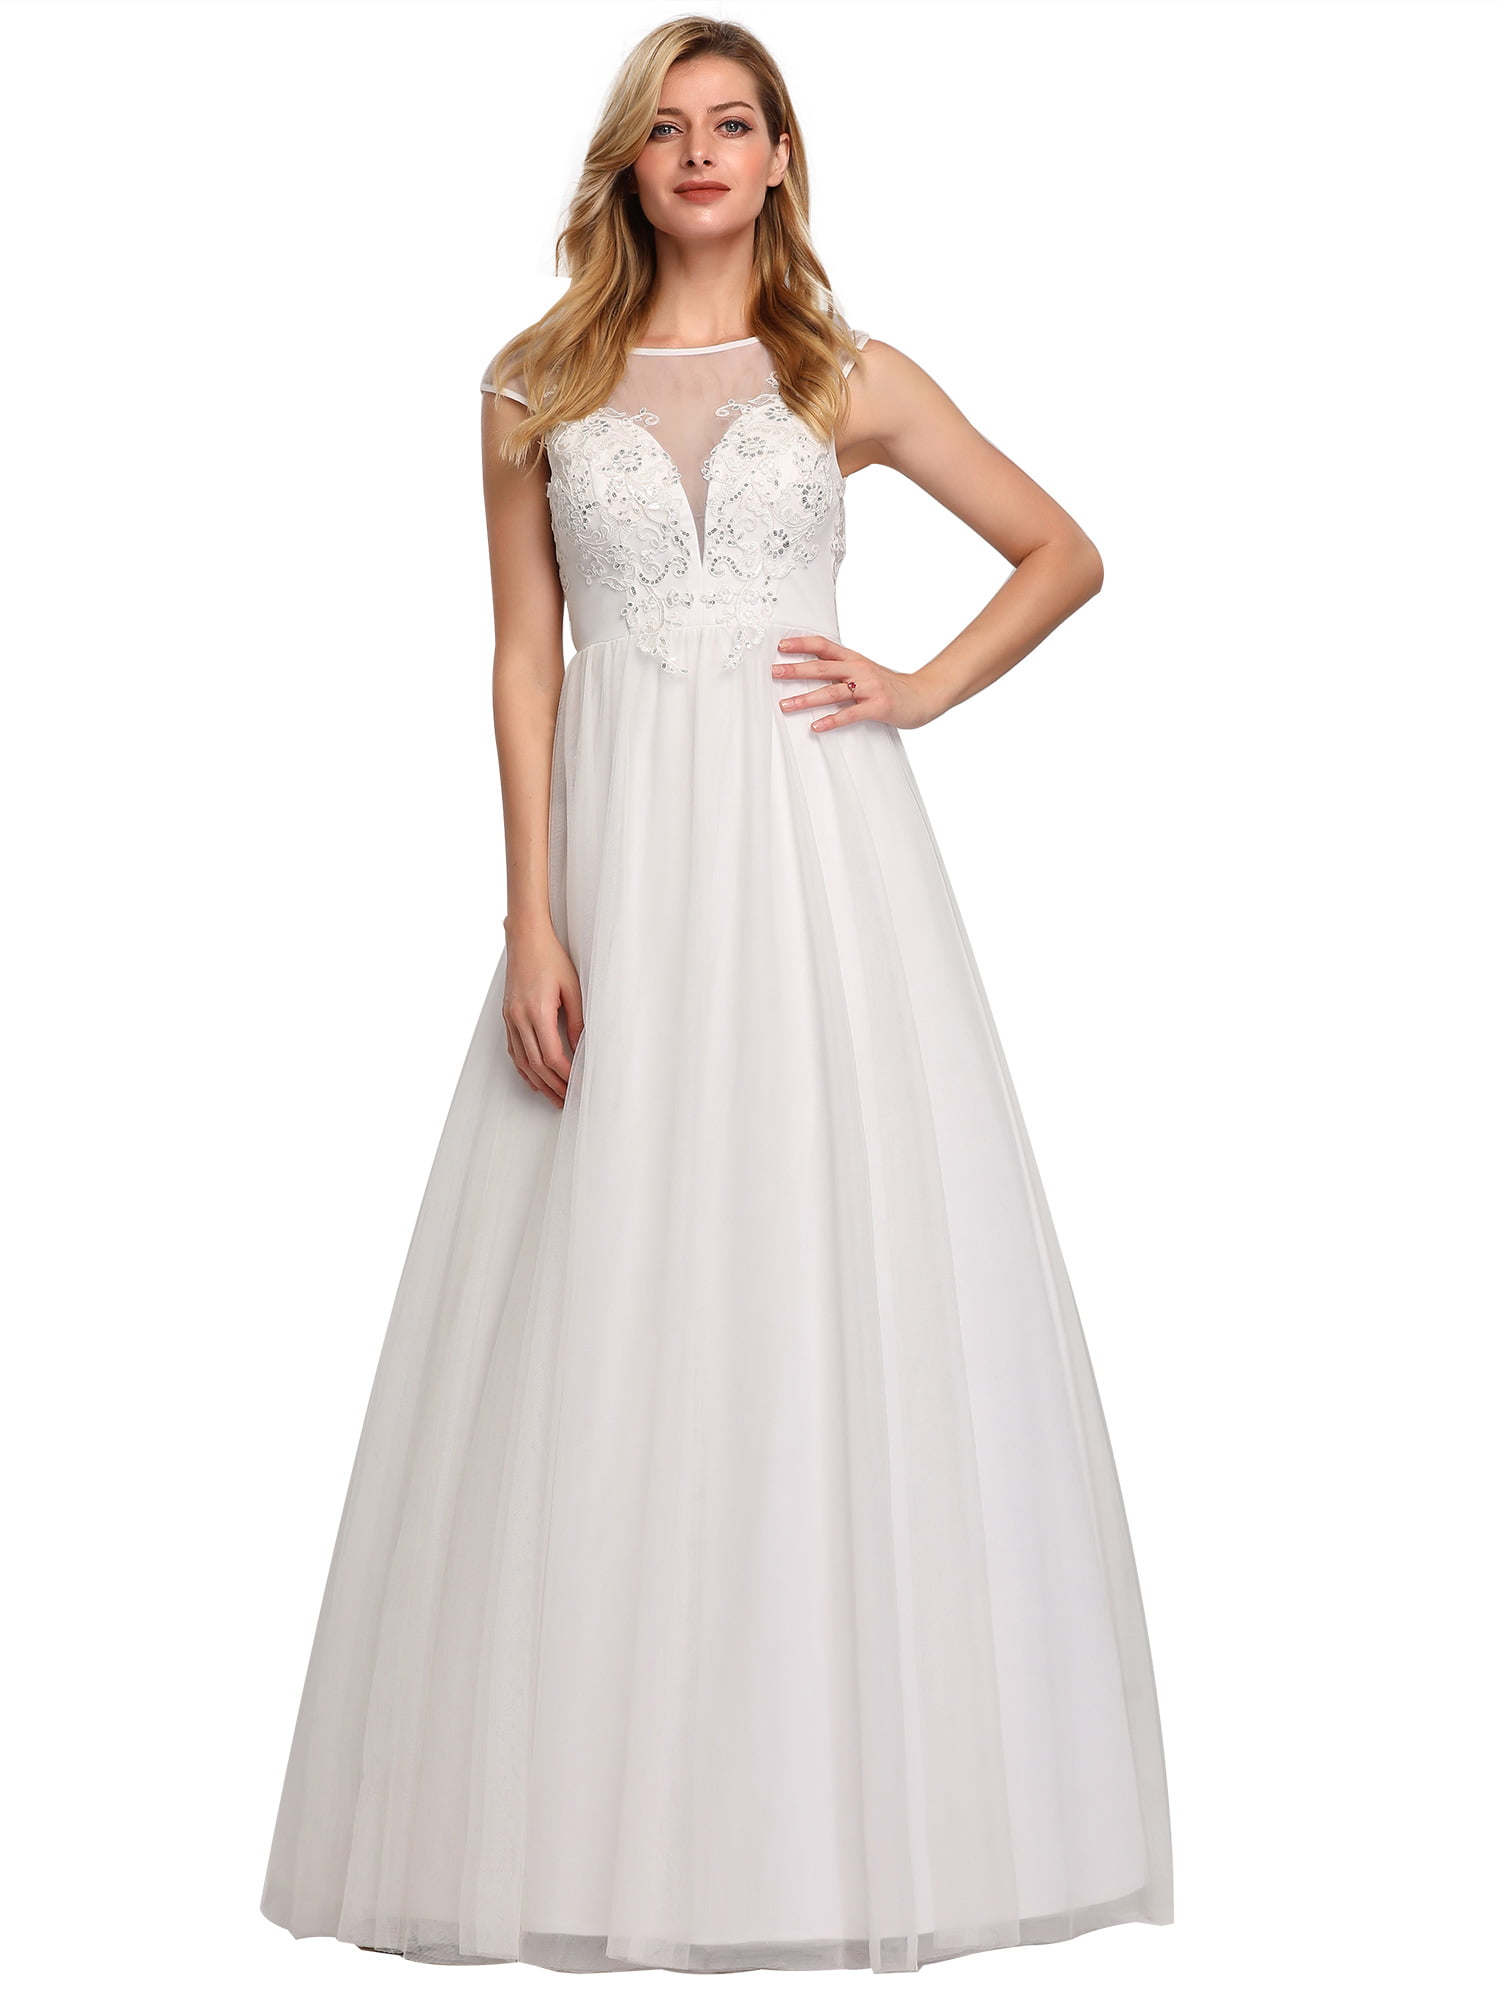 Ever-Pretty US A-Line Wedding Dress Long Strappy Formal Evening Ball Gowns 07835 